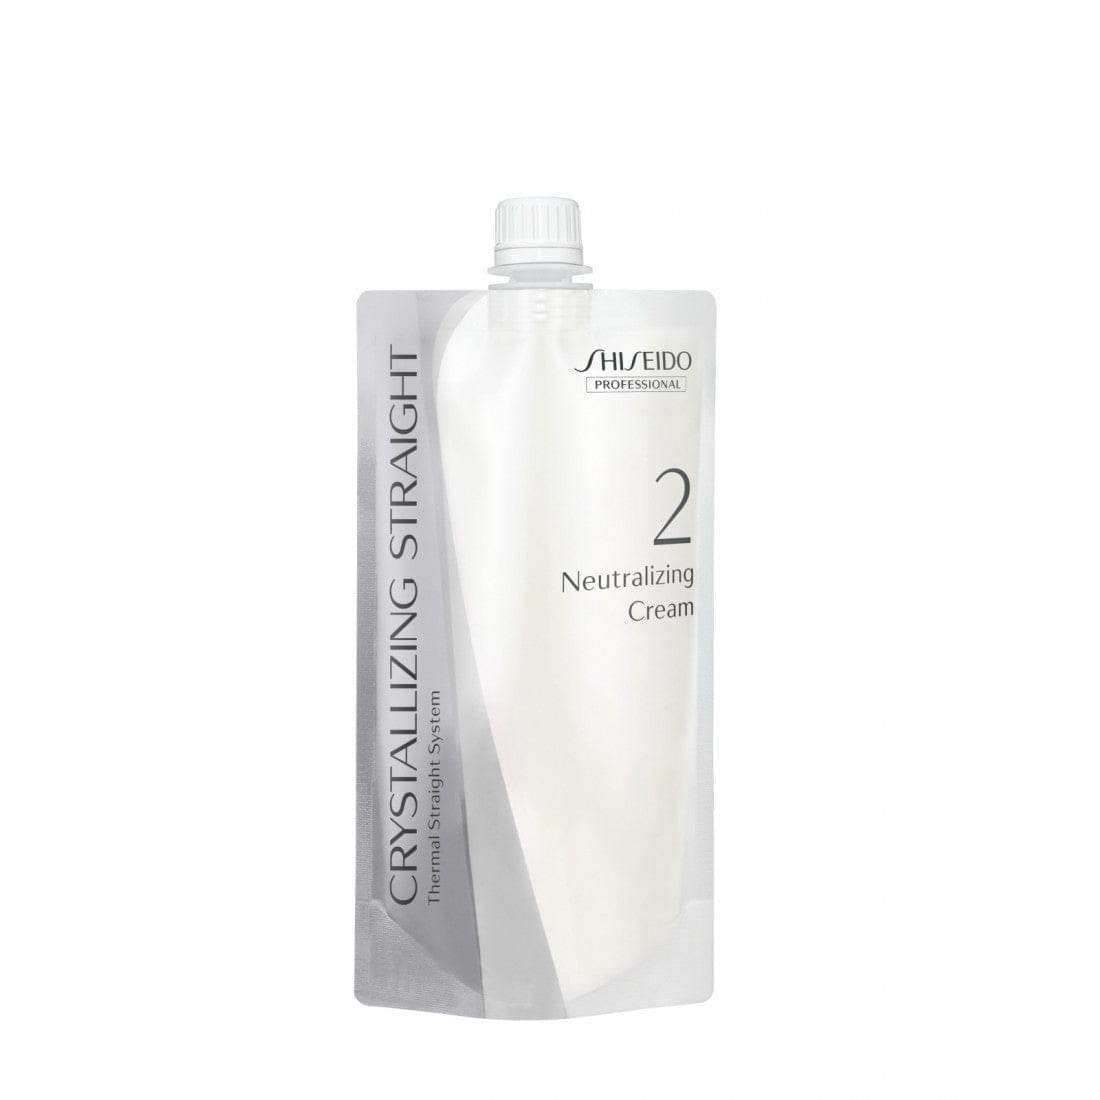 Crystallizing Straight Ex1 – 400G + Nutralising Cream 400G For Very Resistant To Resistant Hair